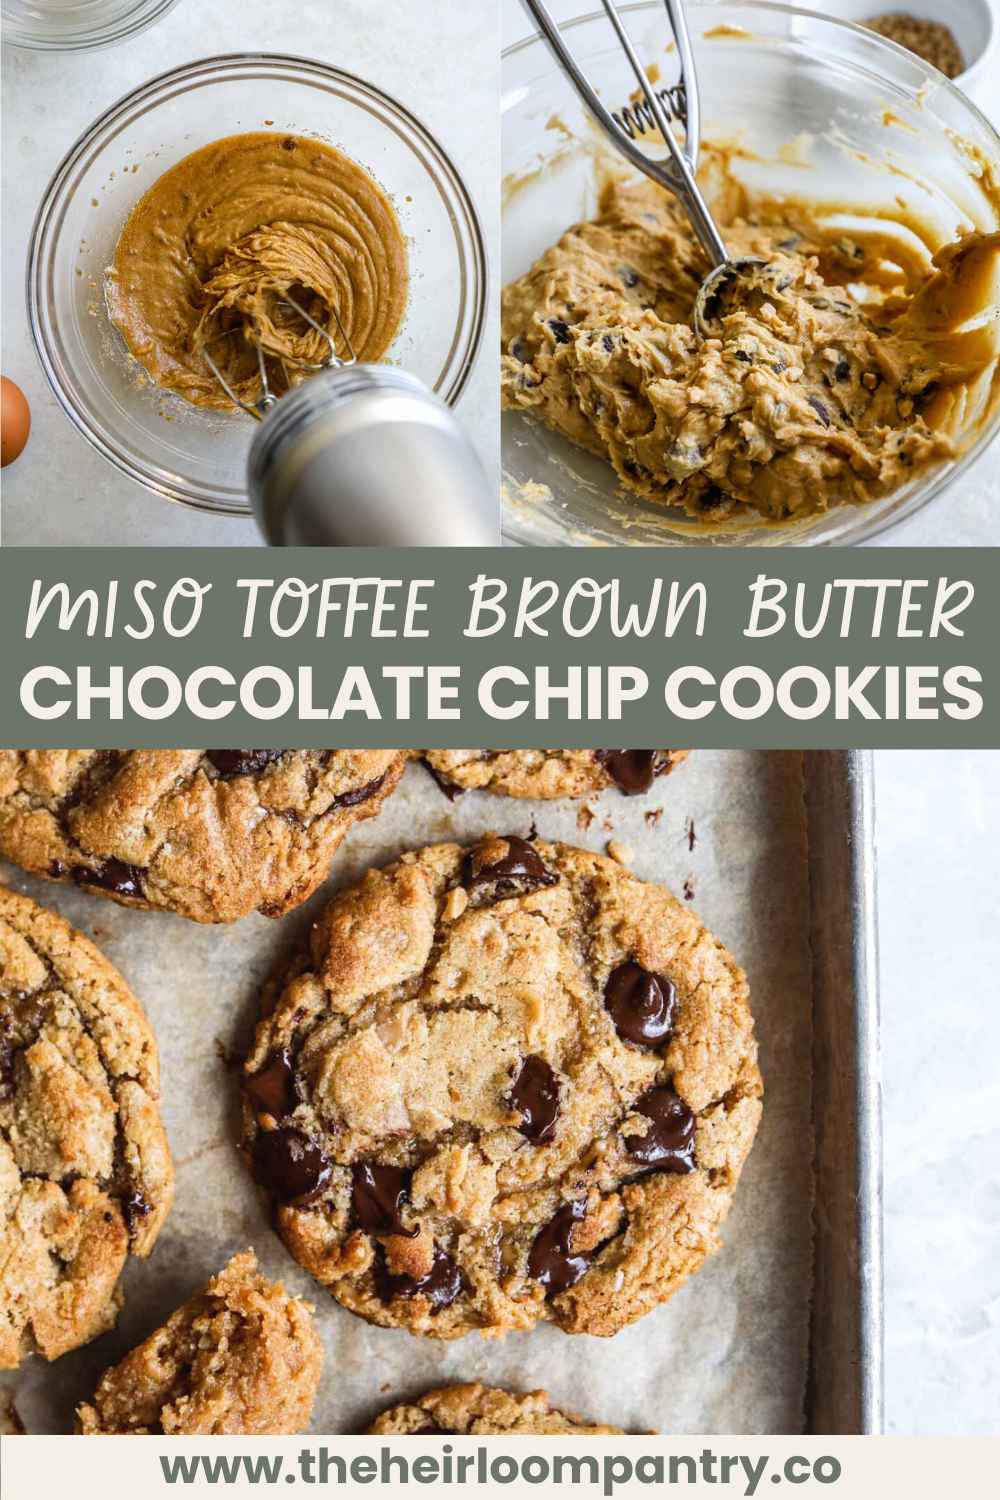 Miso toffee brown butter chocolate chip cookies Pinterest pin.